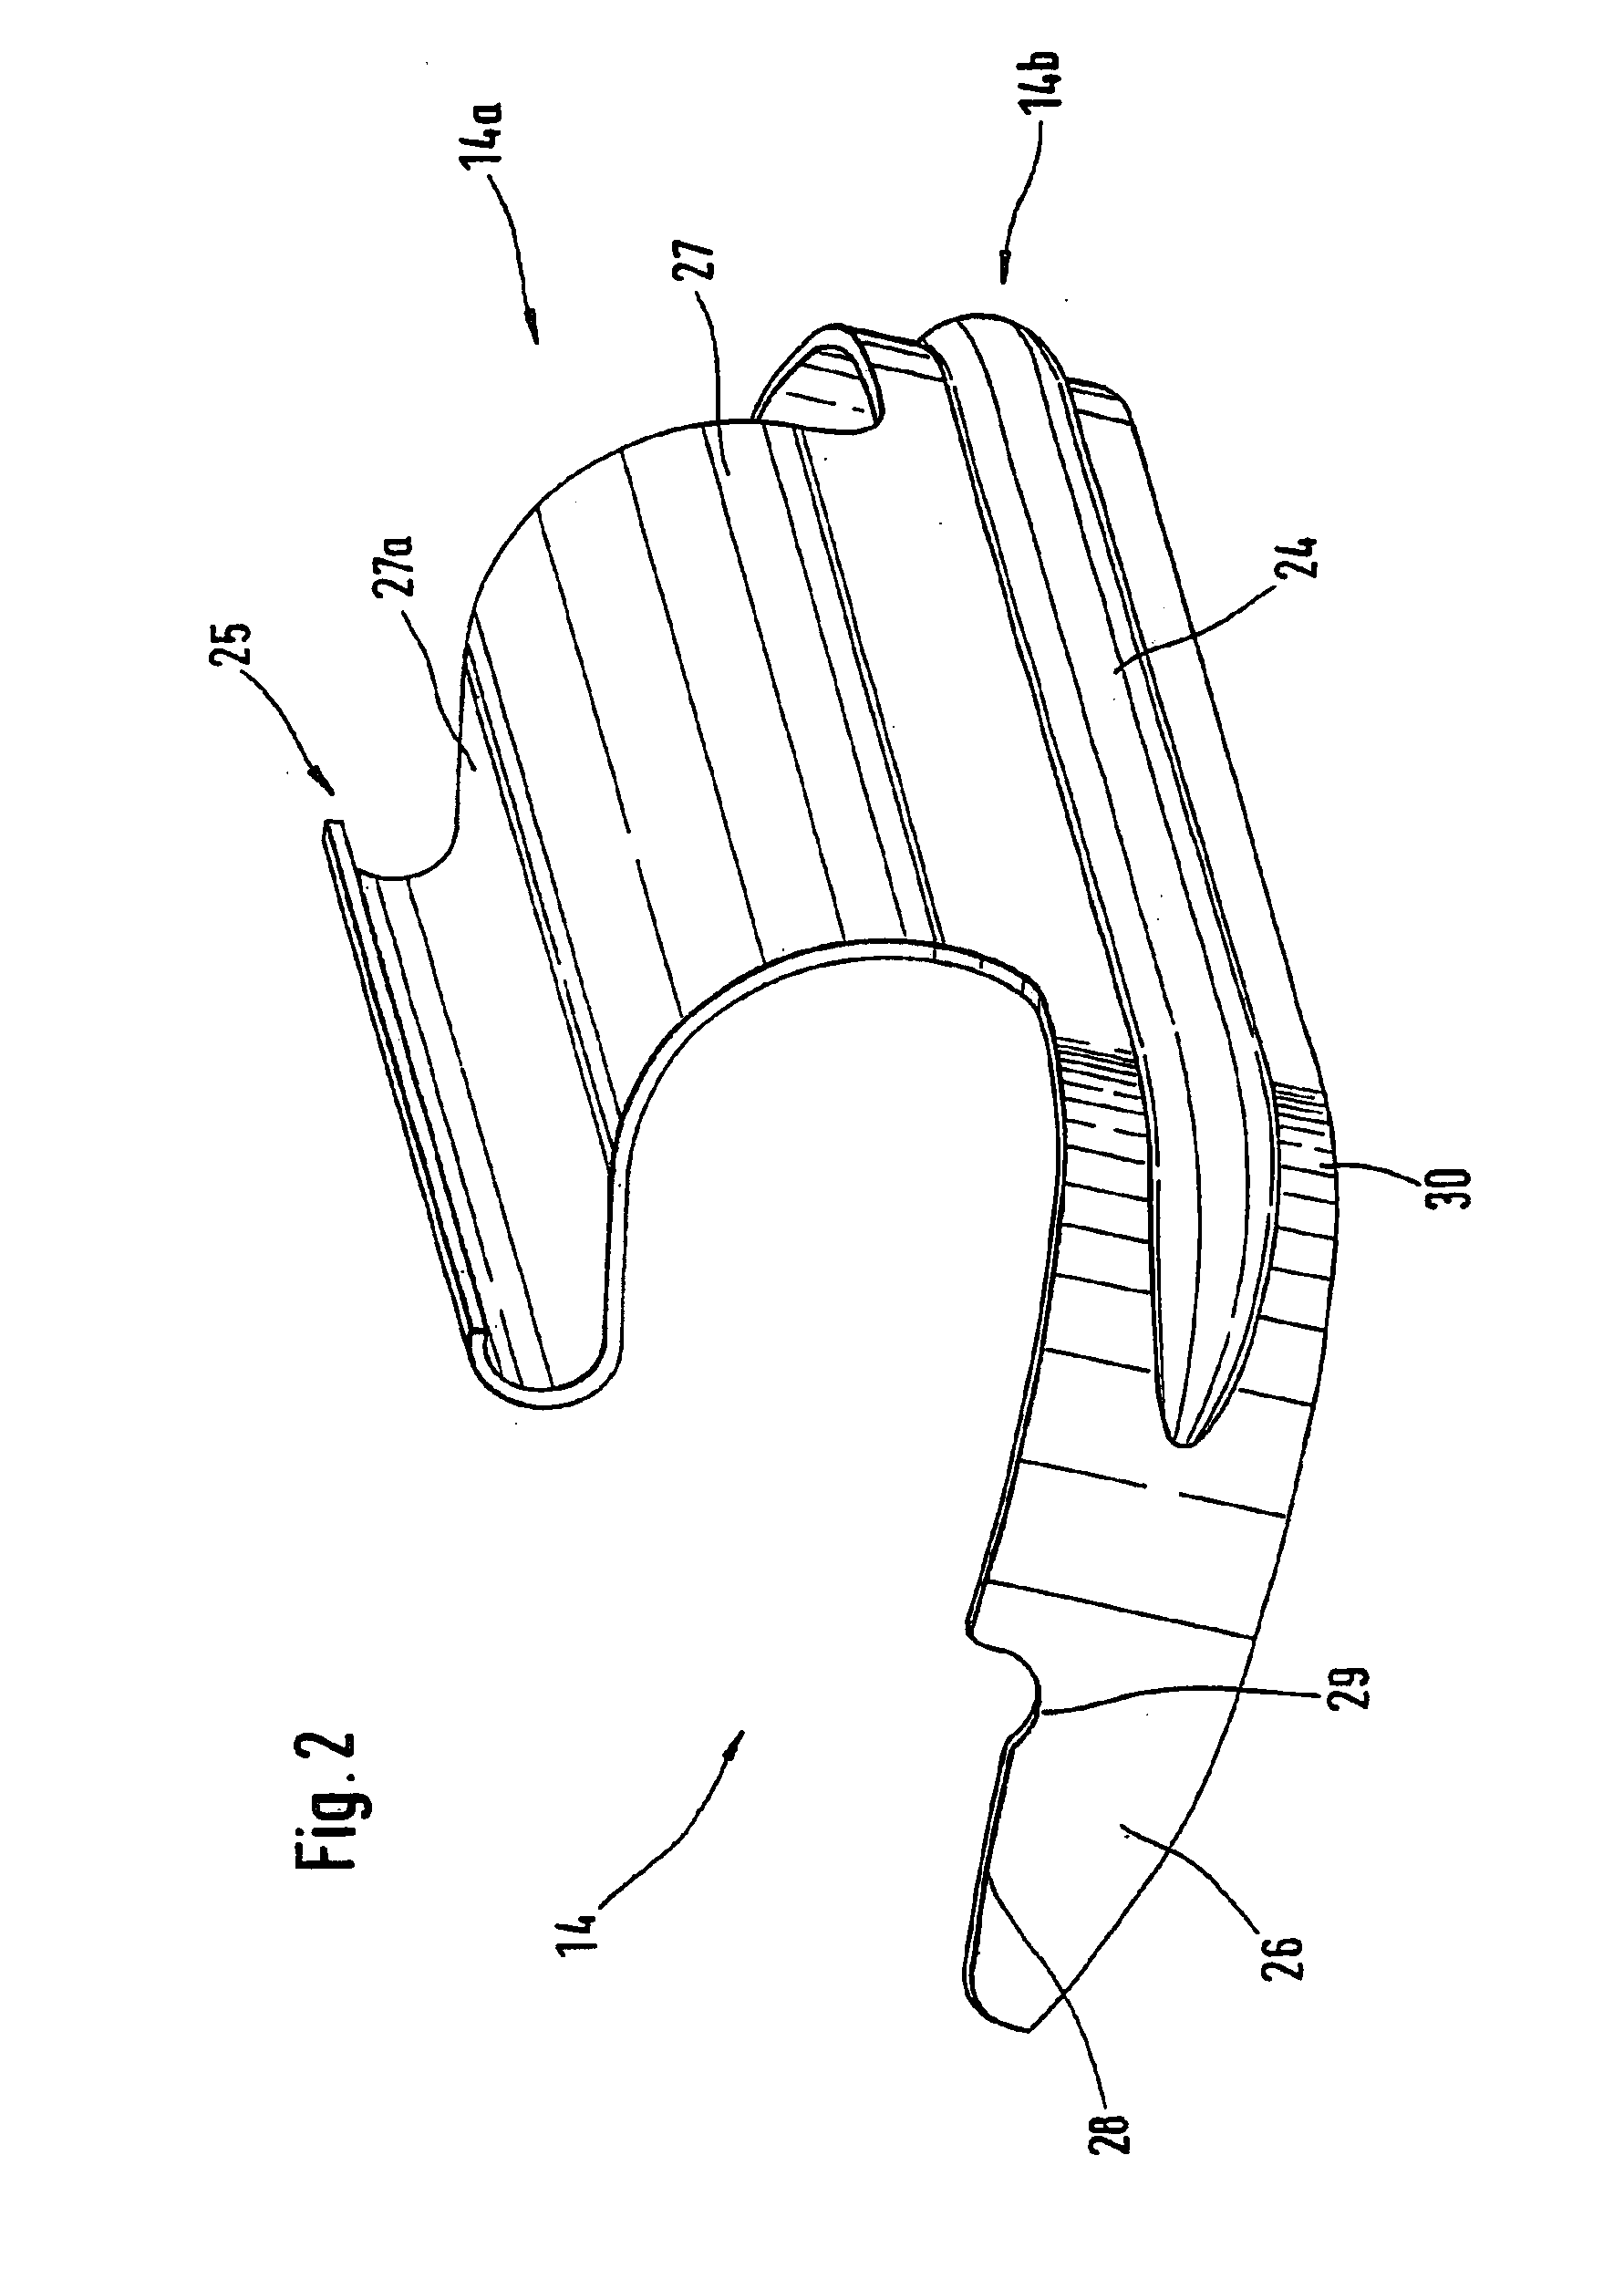 Sensor for optically detecting foreign bodies particularly raindrops on a glass pane